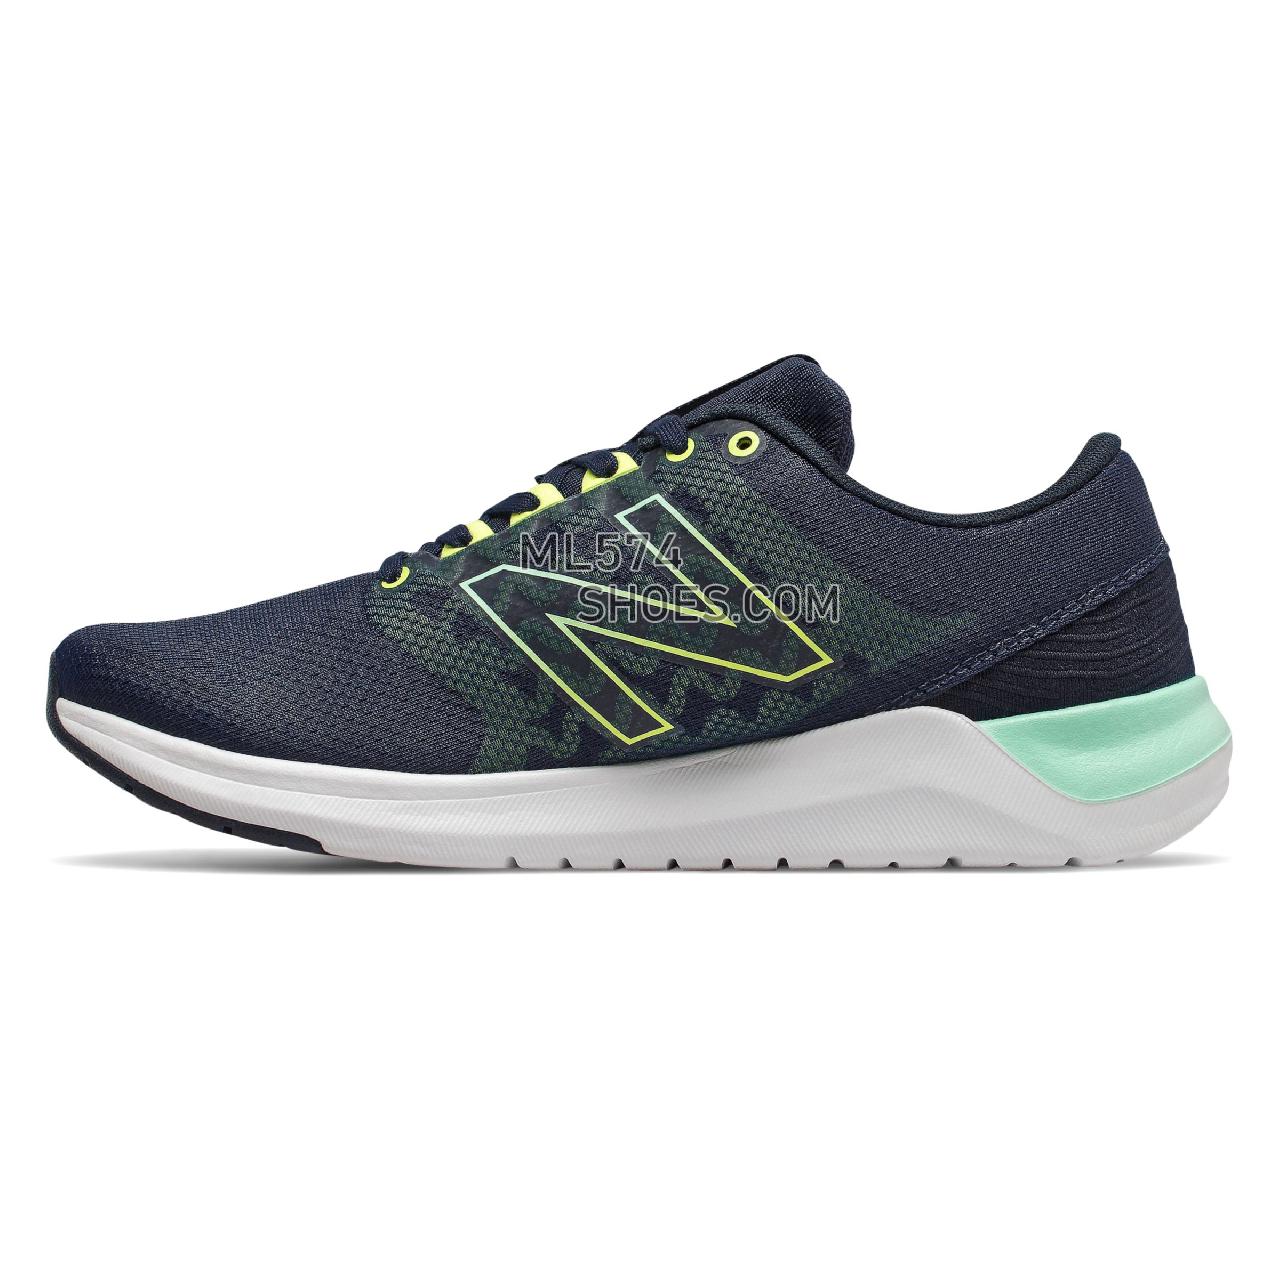 New Balance CUSH+ 715v4 - Women's Workout - Natural Indigo with Neo Mint and White - WX715LN4